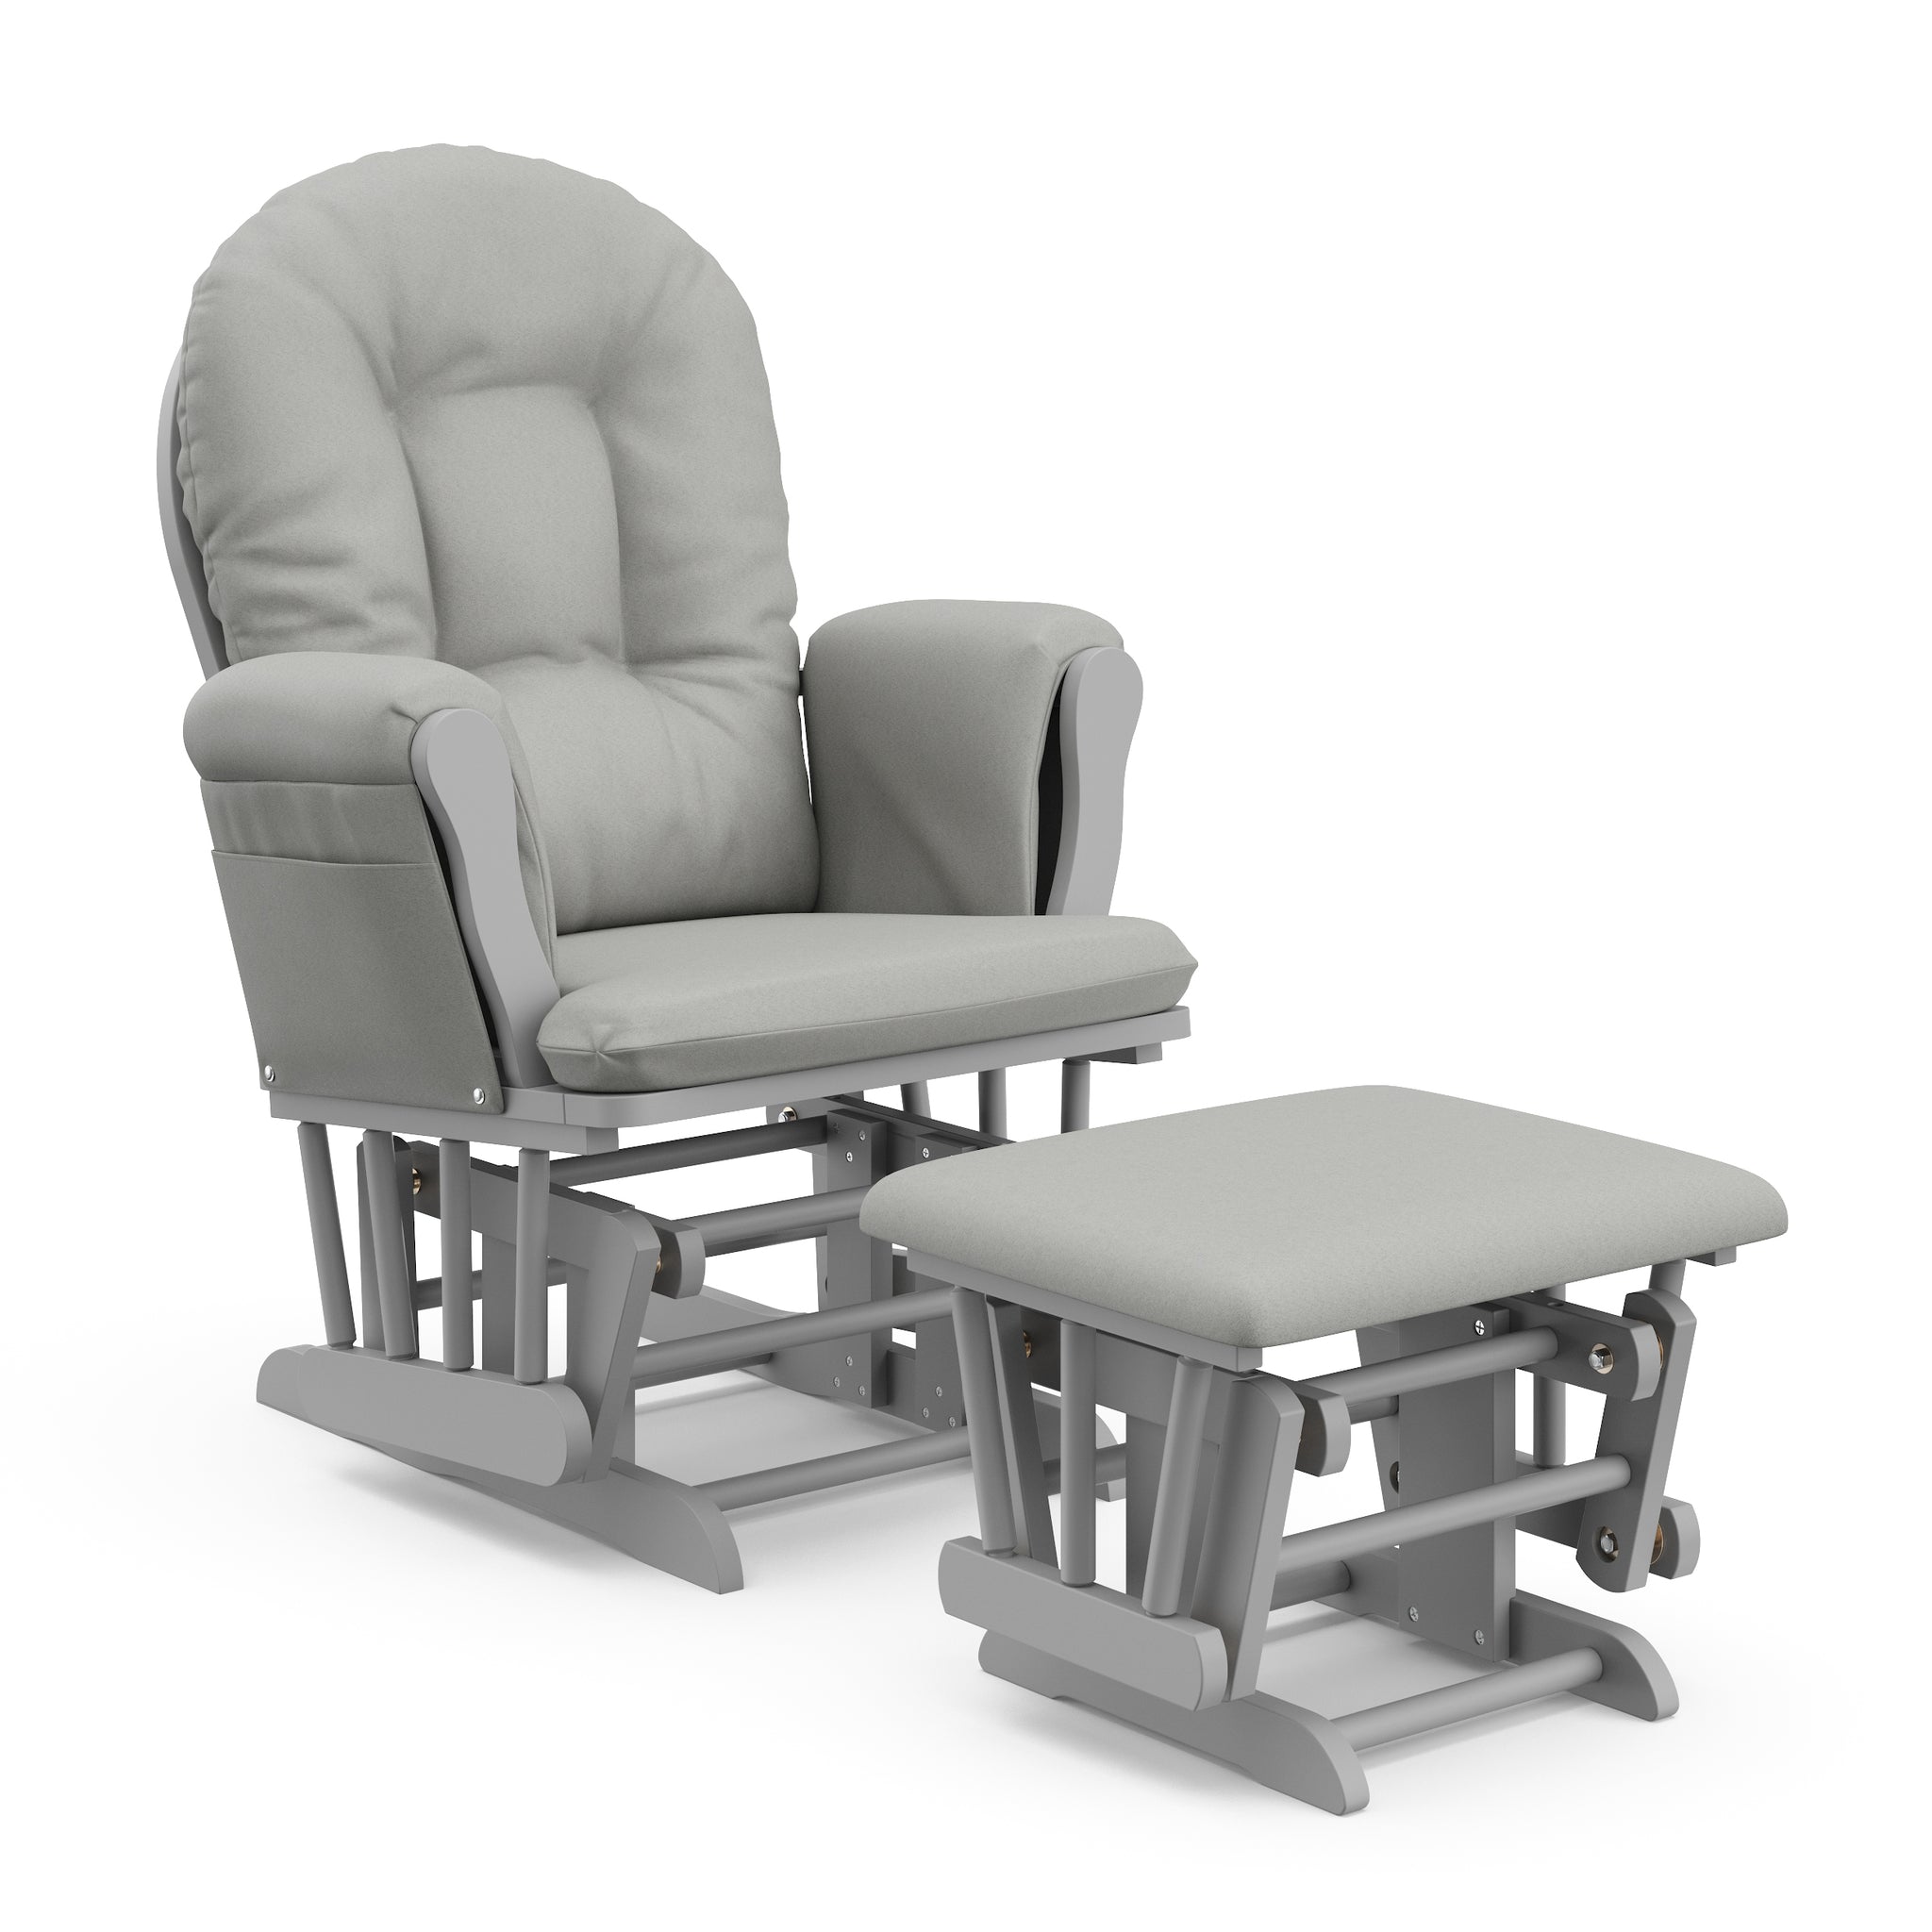 pebble gray glider and ottoman with light gray cushions angled view